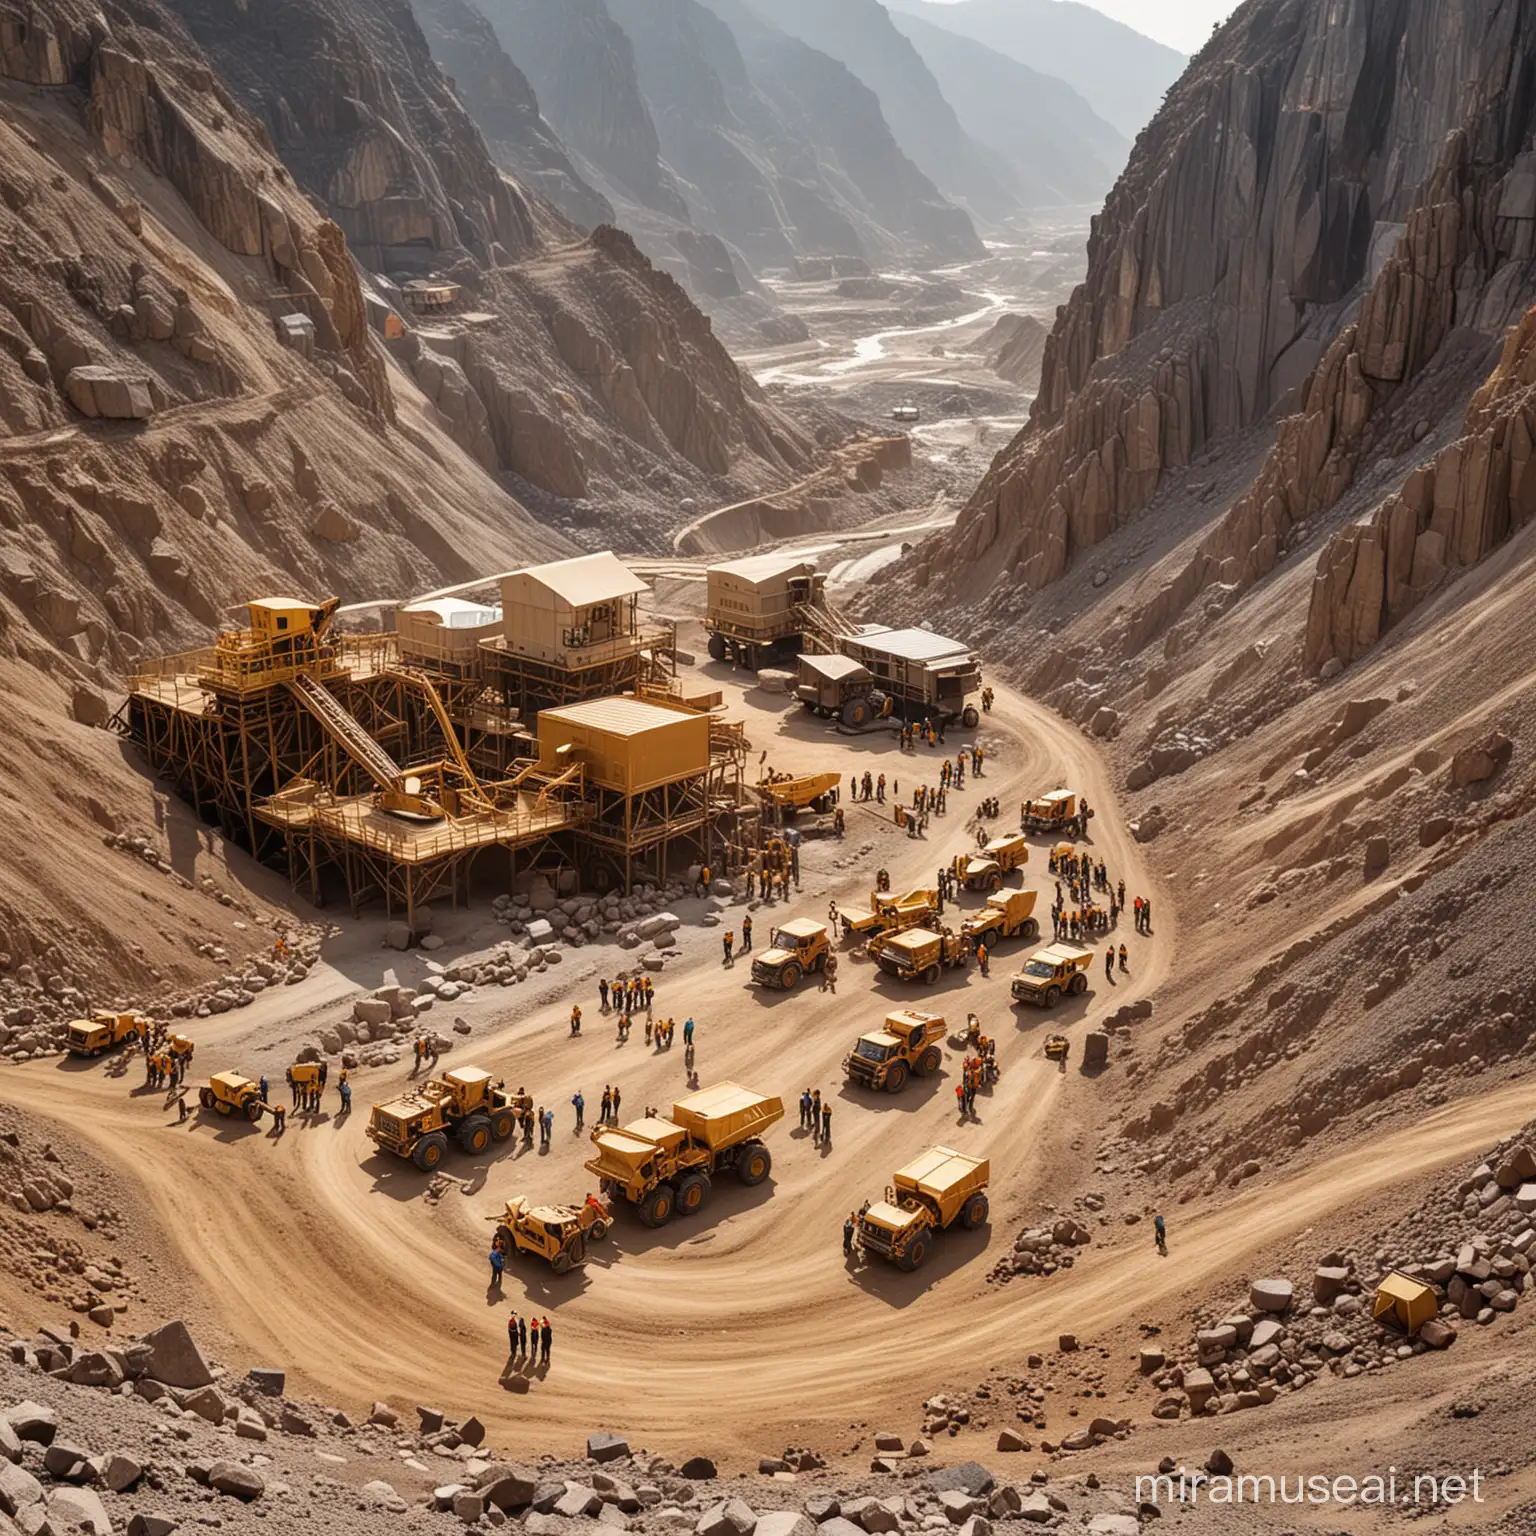 well constructed gold mine, with heavy duty mining equipments, and workers.